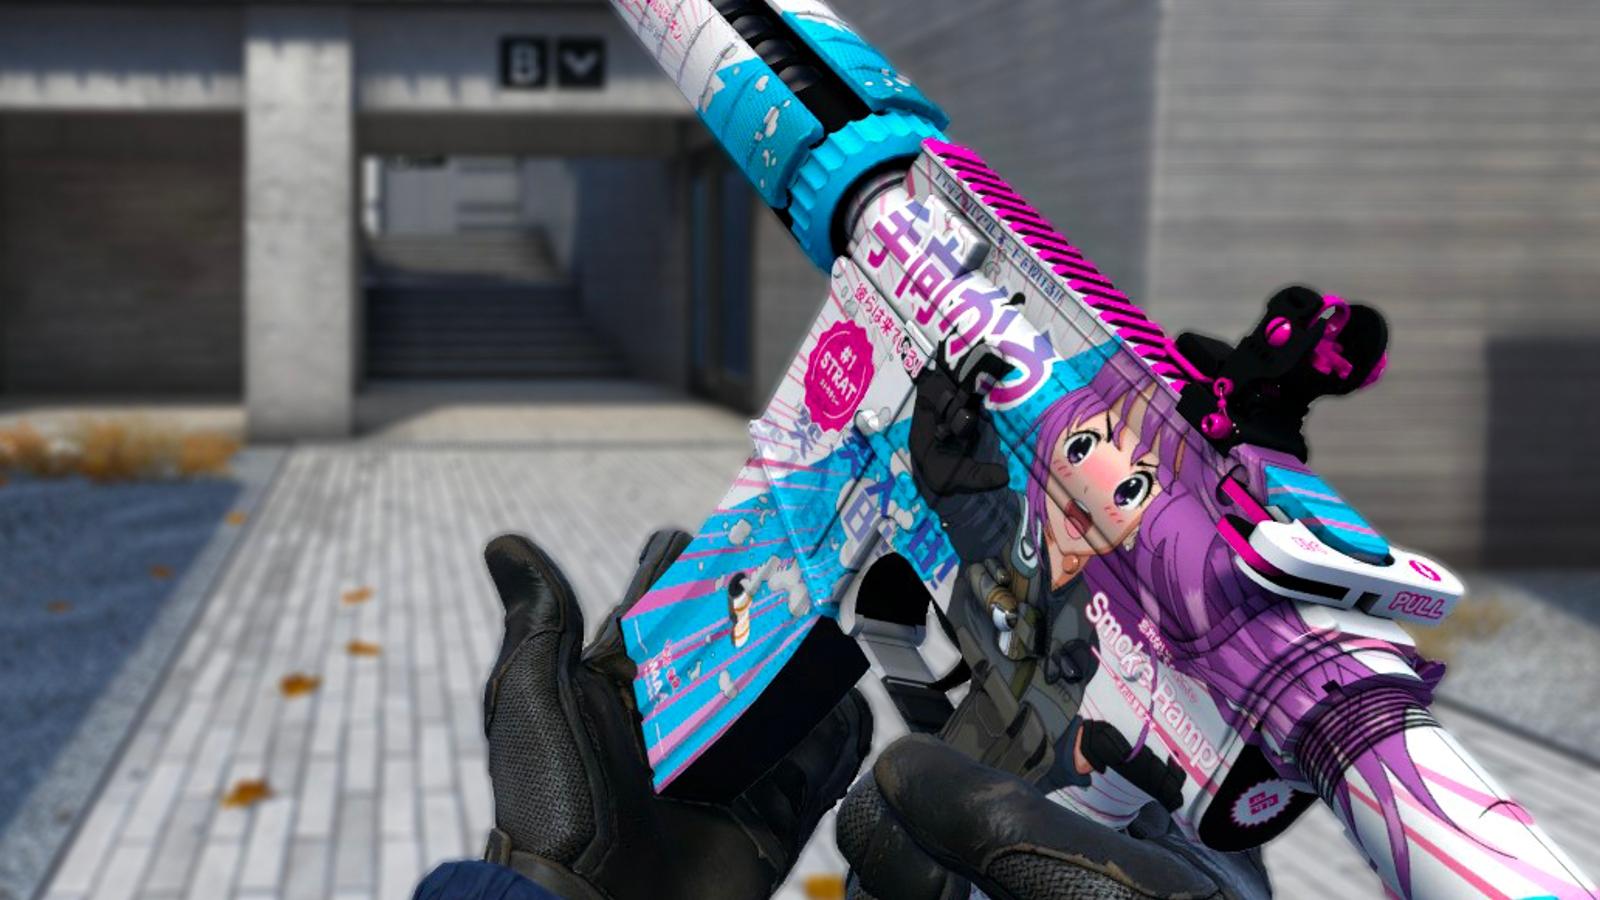 cs go skin Shnurov M4A4 download the new version for iphone